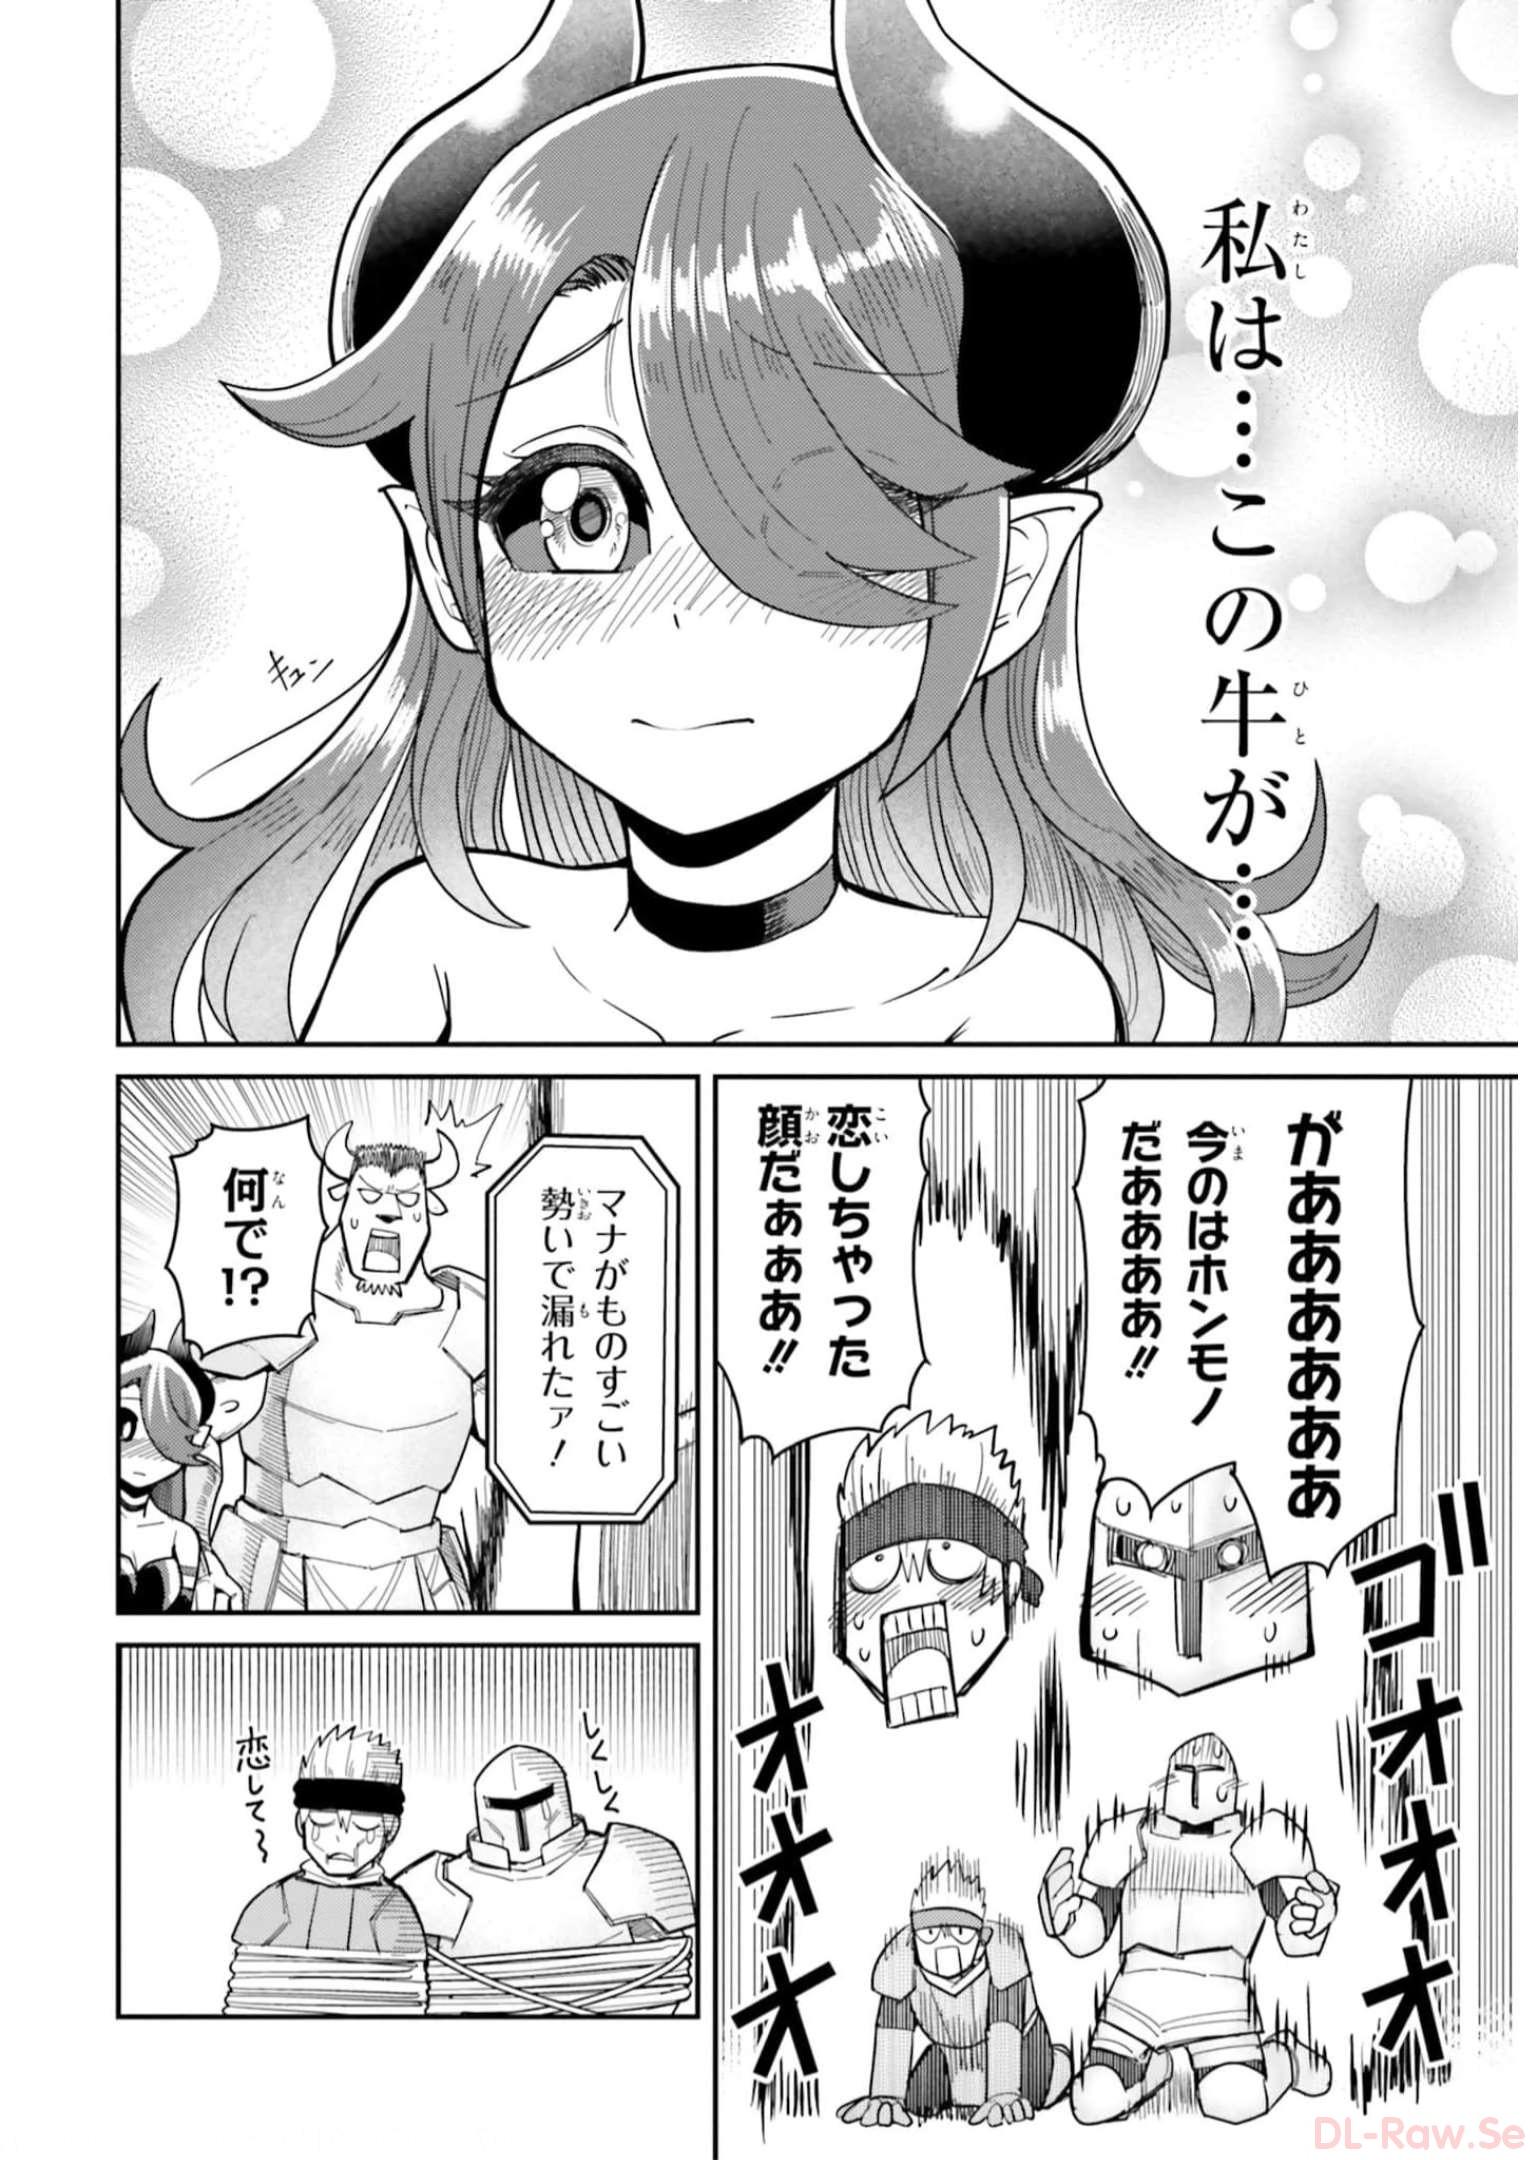 Dungeon Friends Forever Dungeon’s Childhood Friend ダンジョンの幼なじみ 第20話 - Page 18